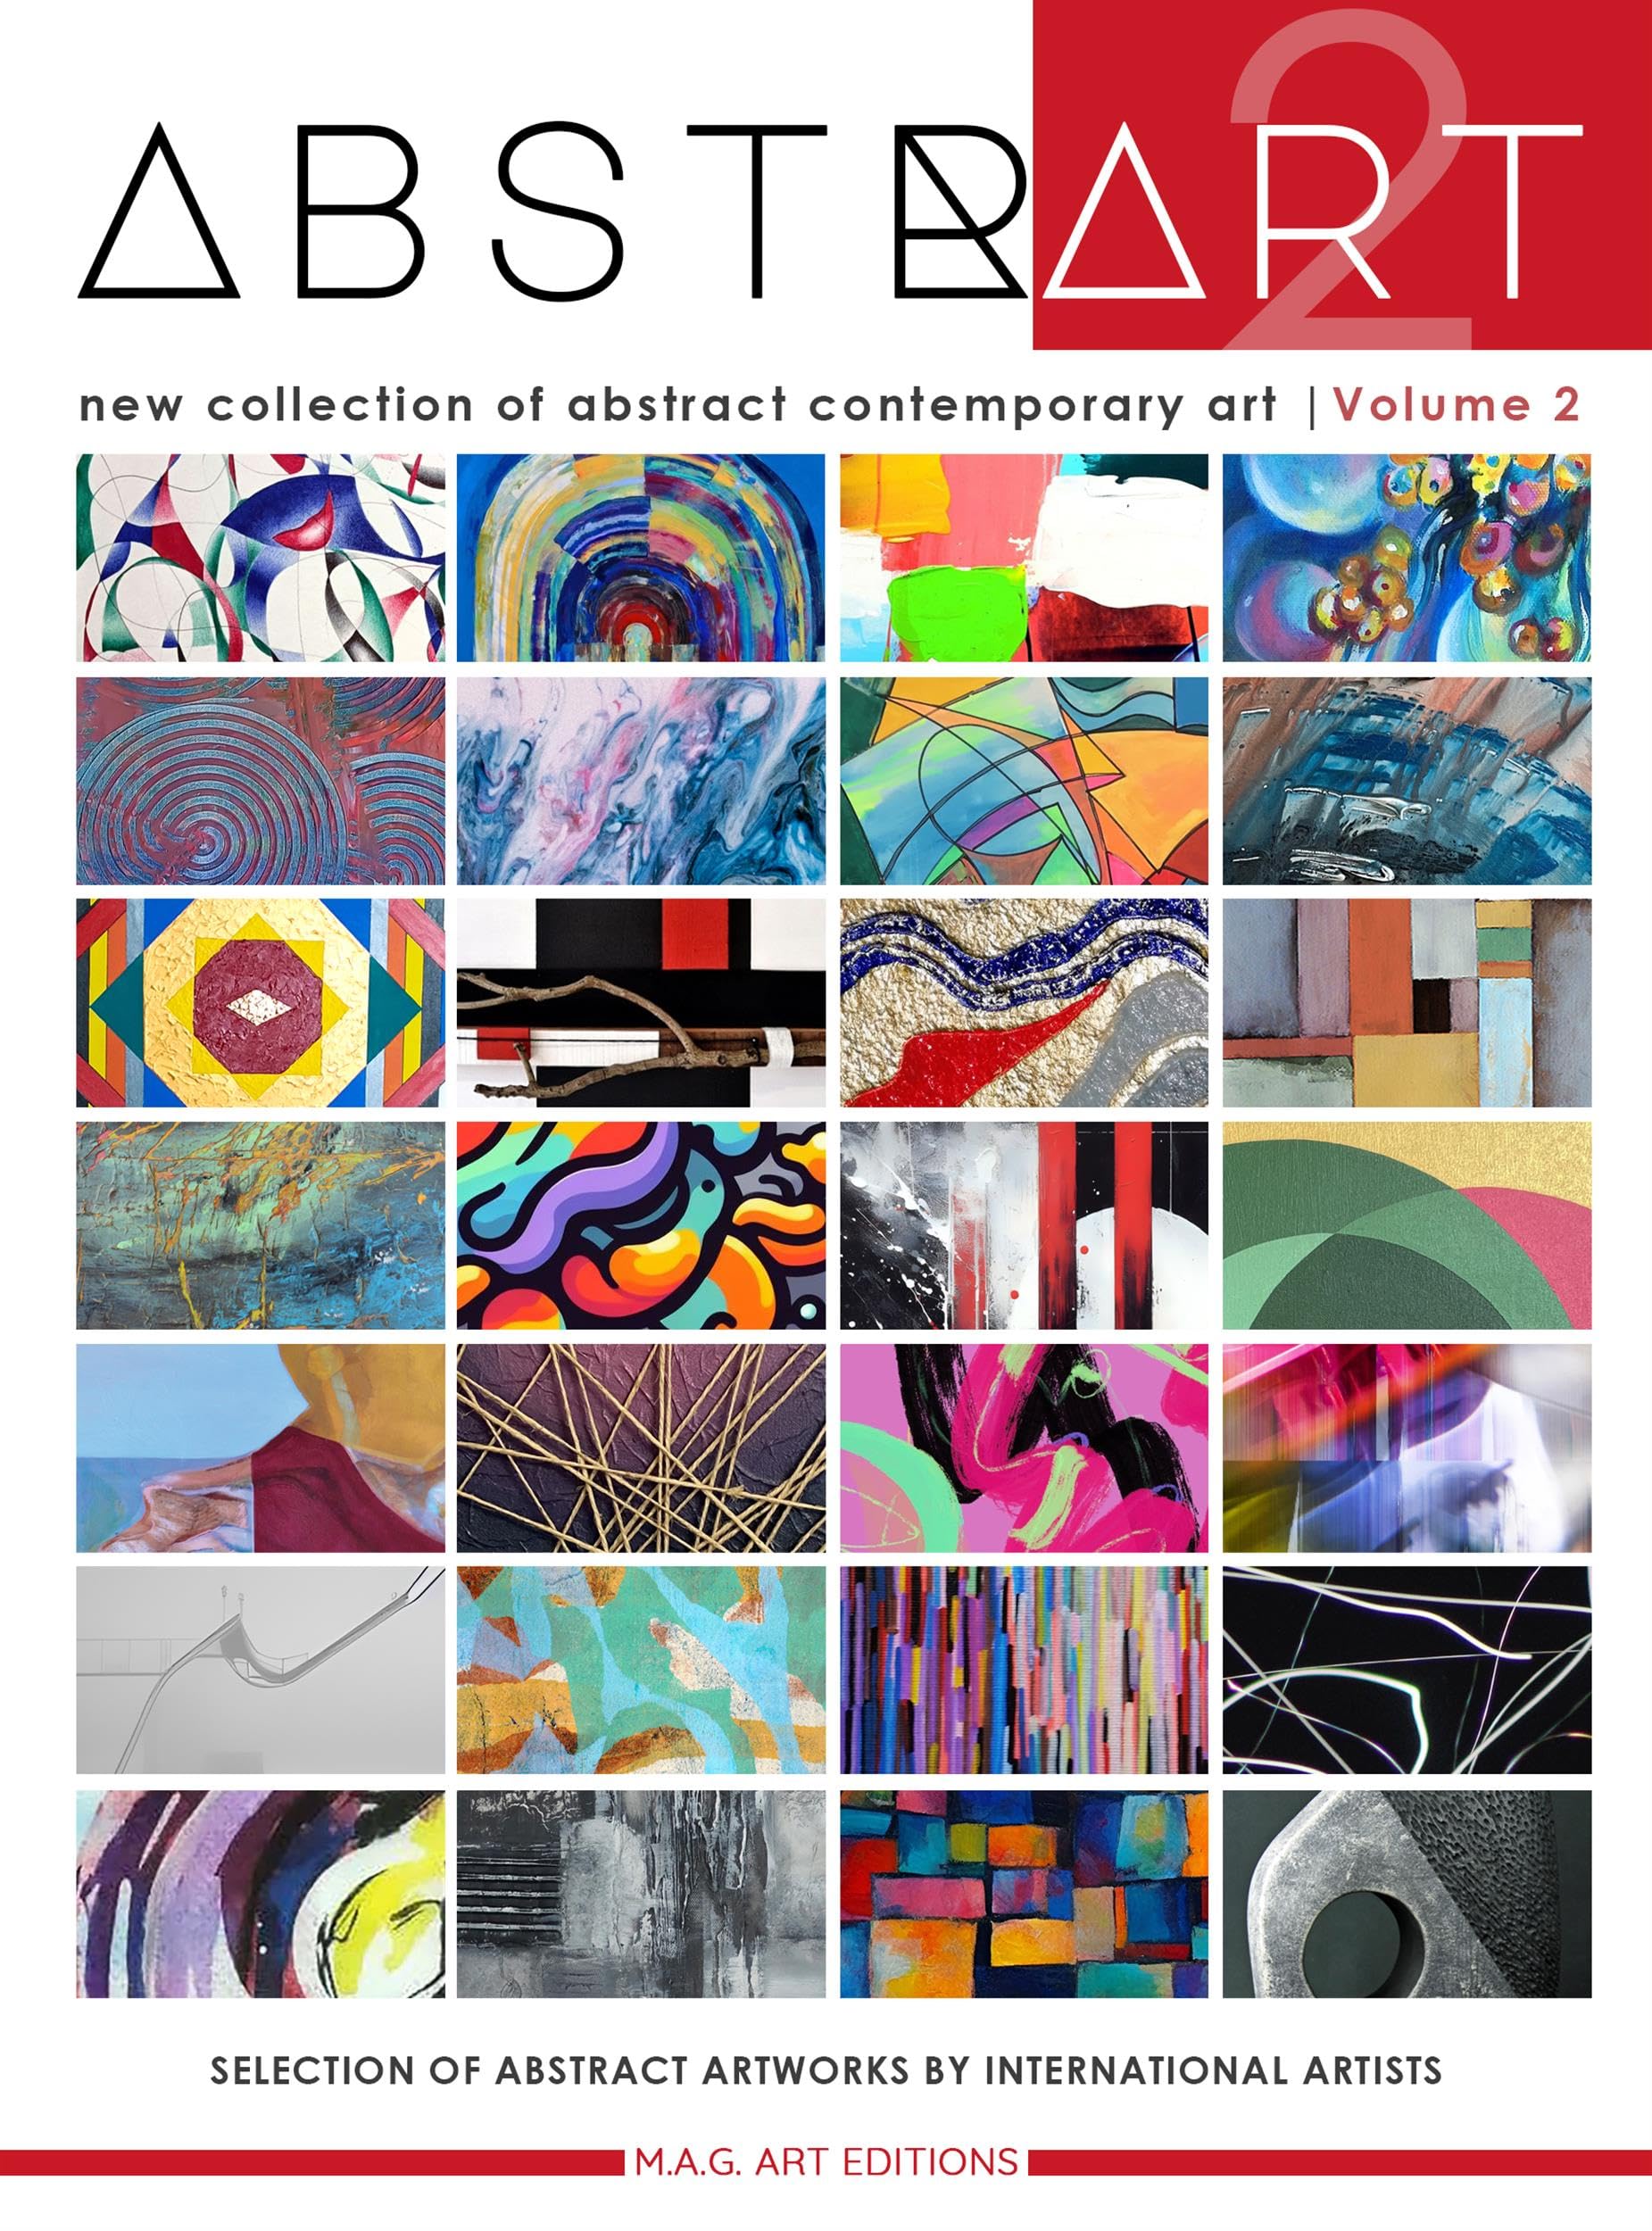 Abstrart vol.2 - new collection of abstract contemporary art: International Catalog of Emerging Artists - Second Edition